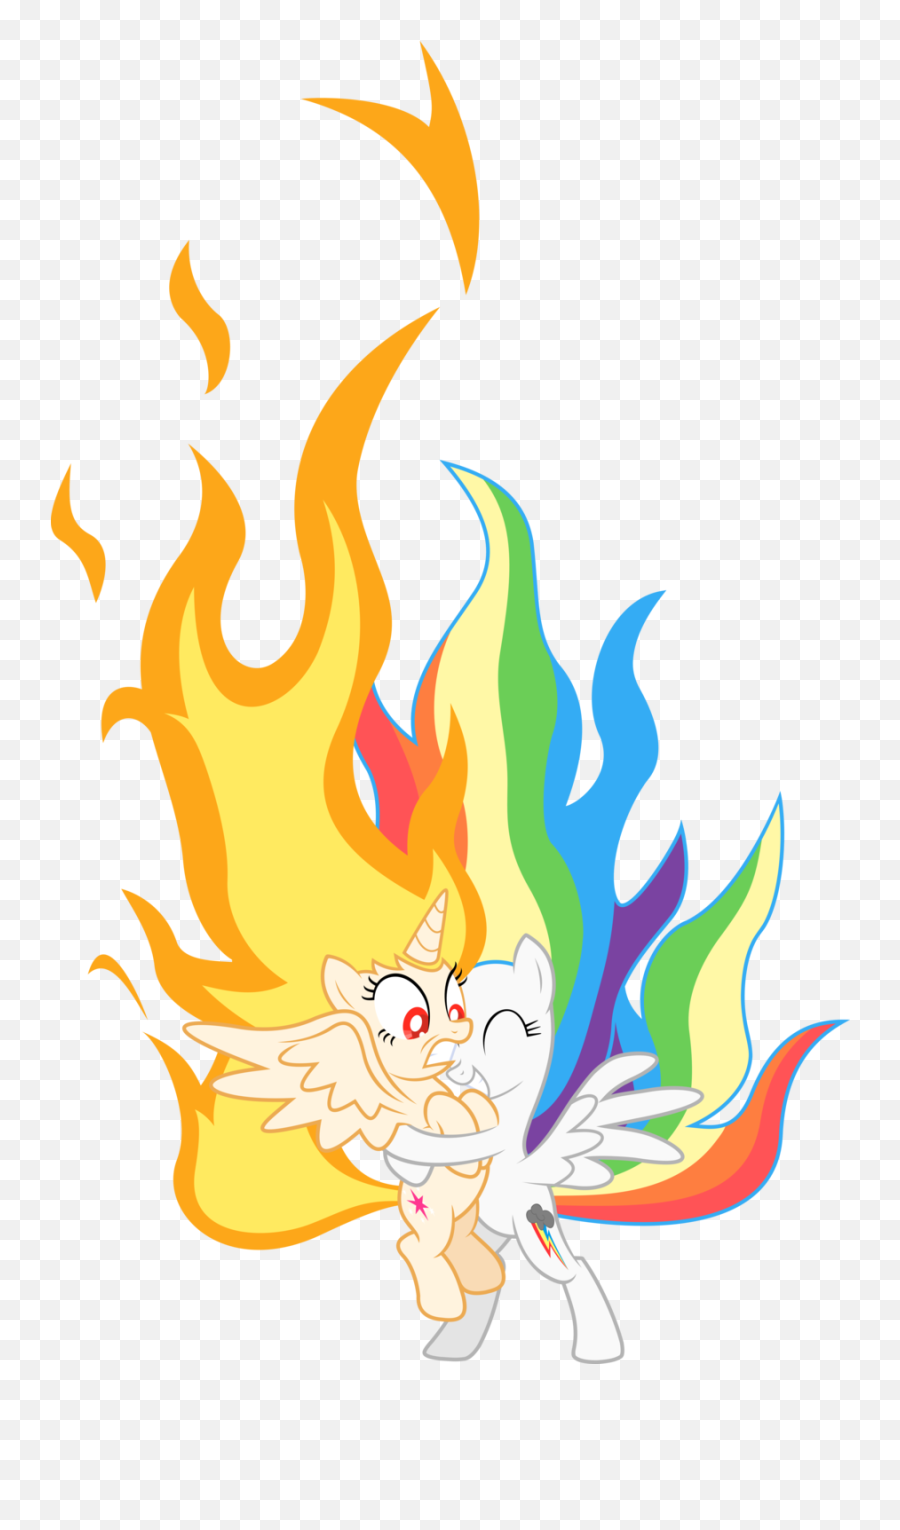 Fire Vector Png - Princess Rainbow Dash,Fire Vector Png